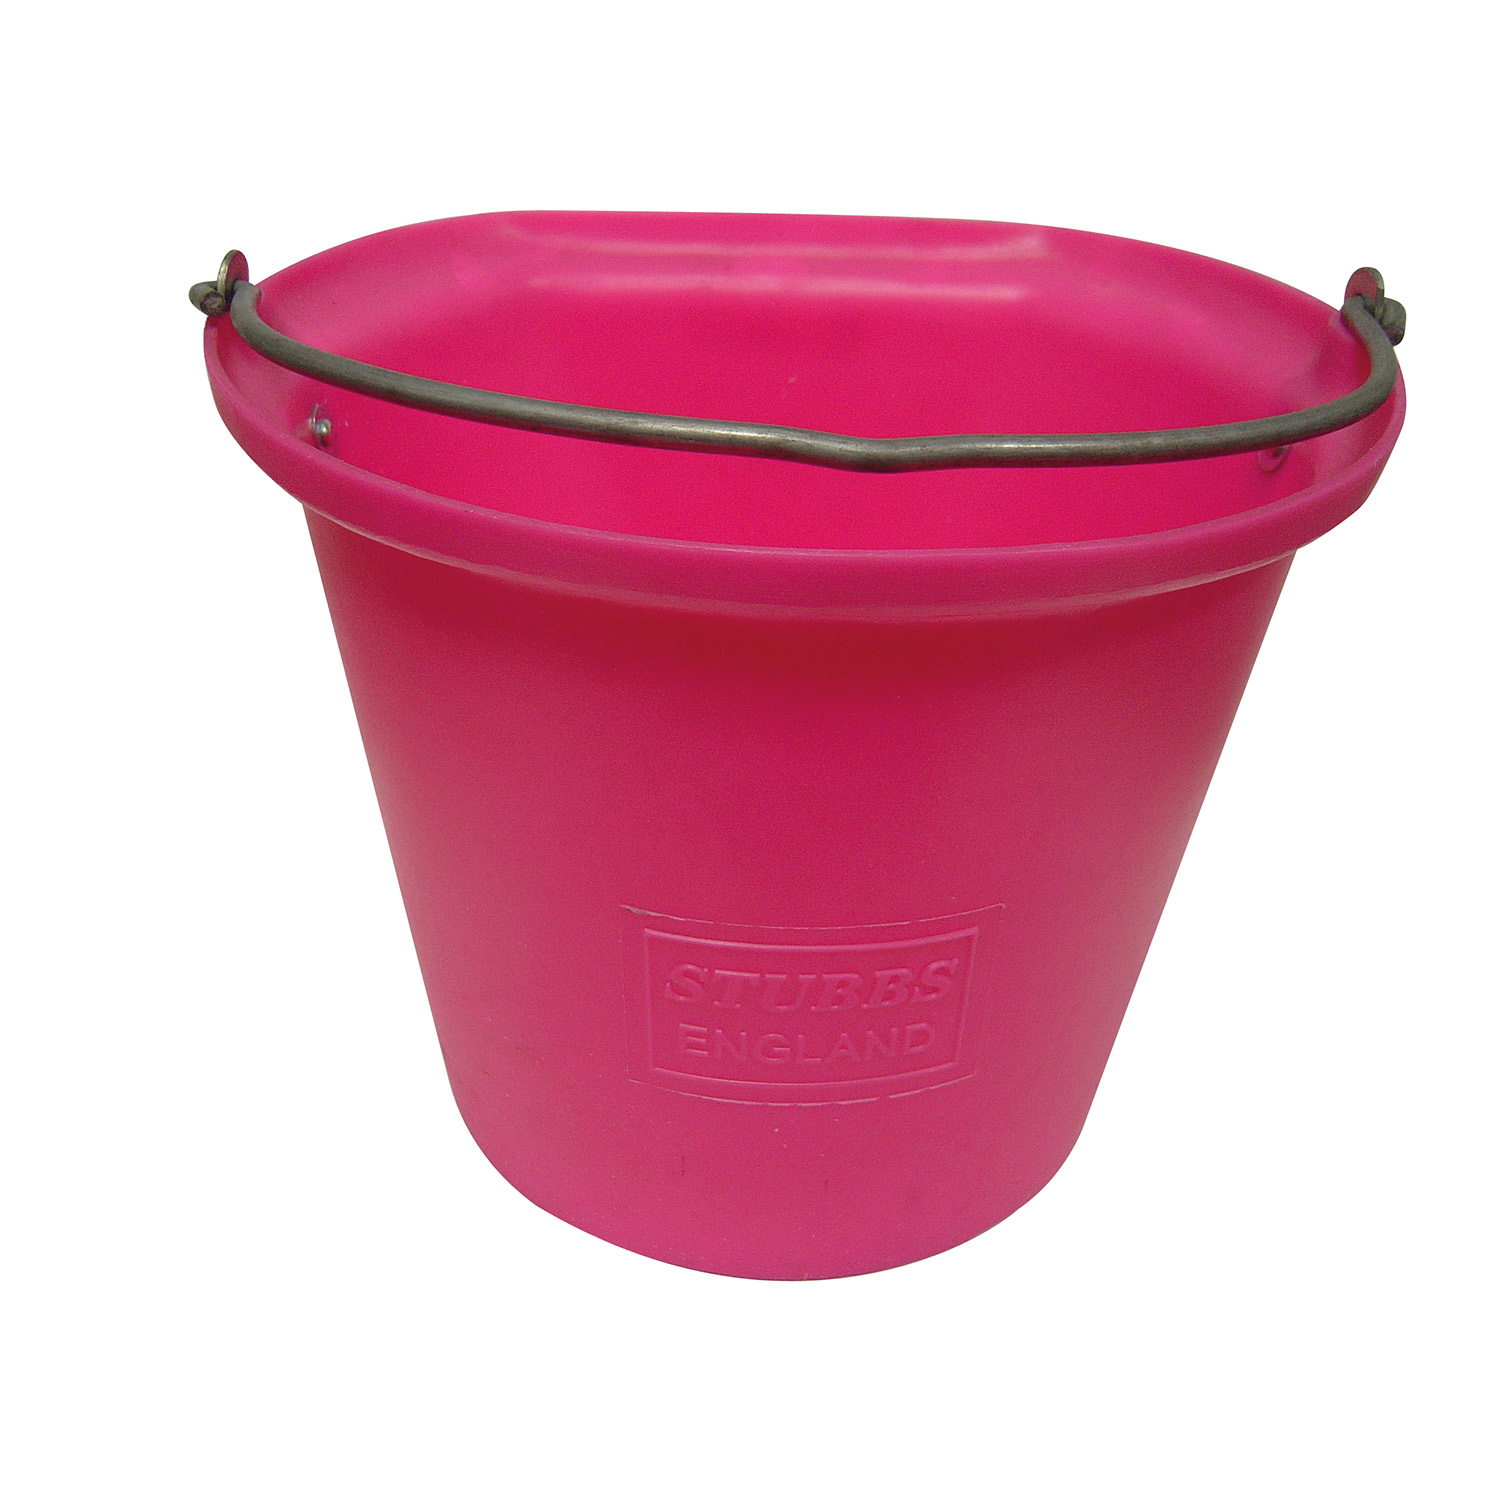 STUBBS HANGING BUCKET FLAT SIDED LARGE 18 LT S85A PINK 18 LT